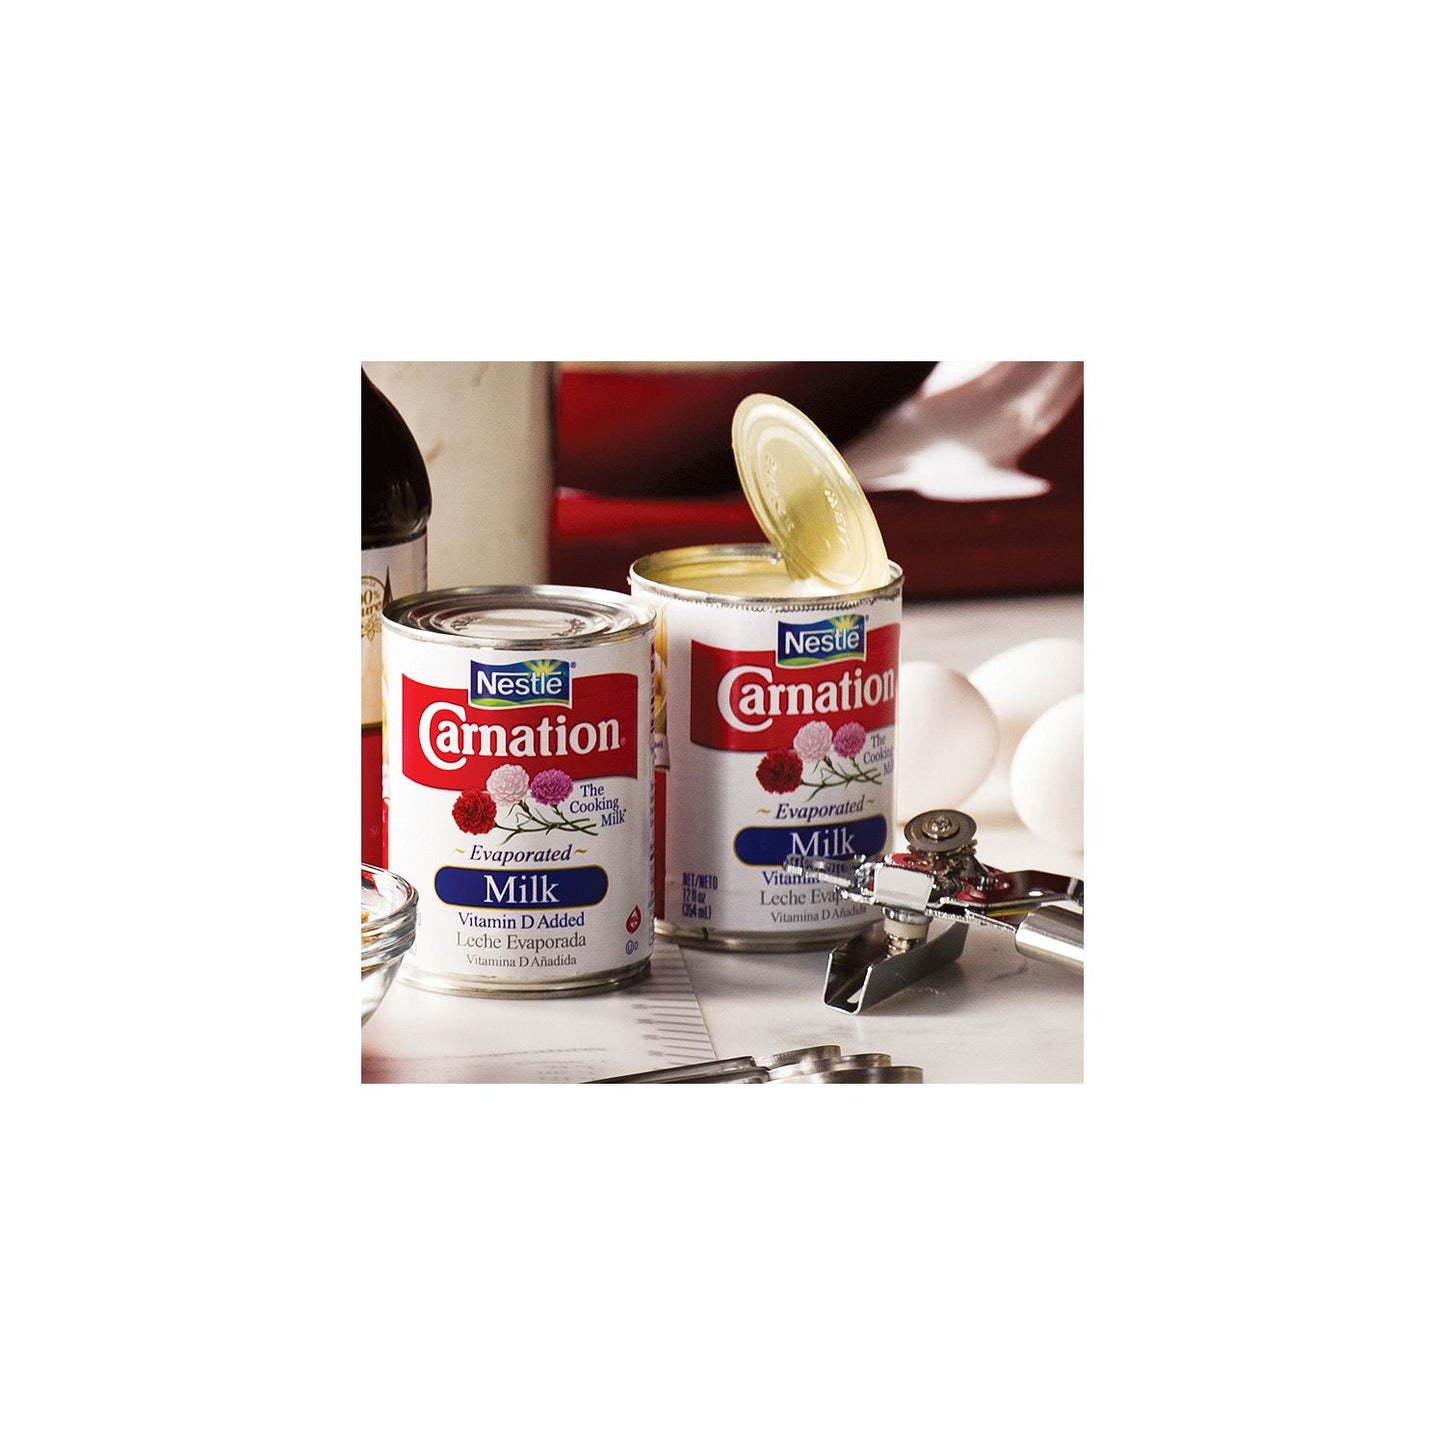 Carnation Evaporated Milk (12 oz. cans, 8 pk.)